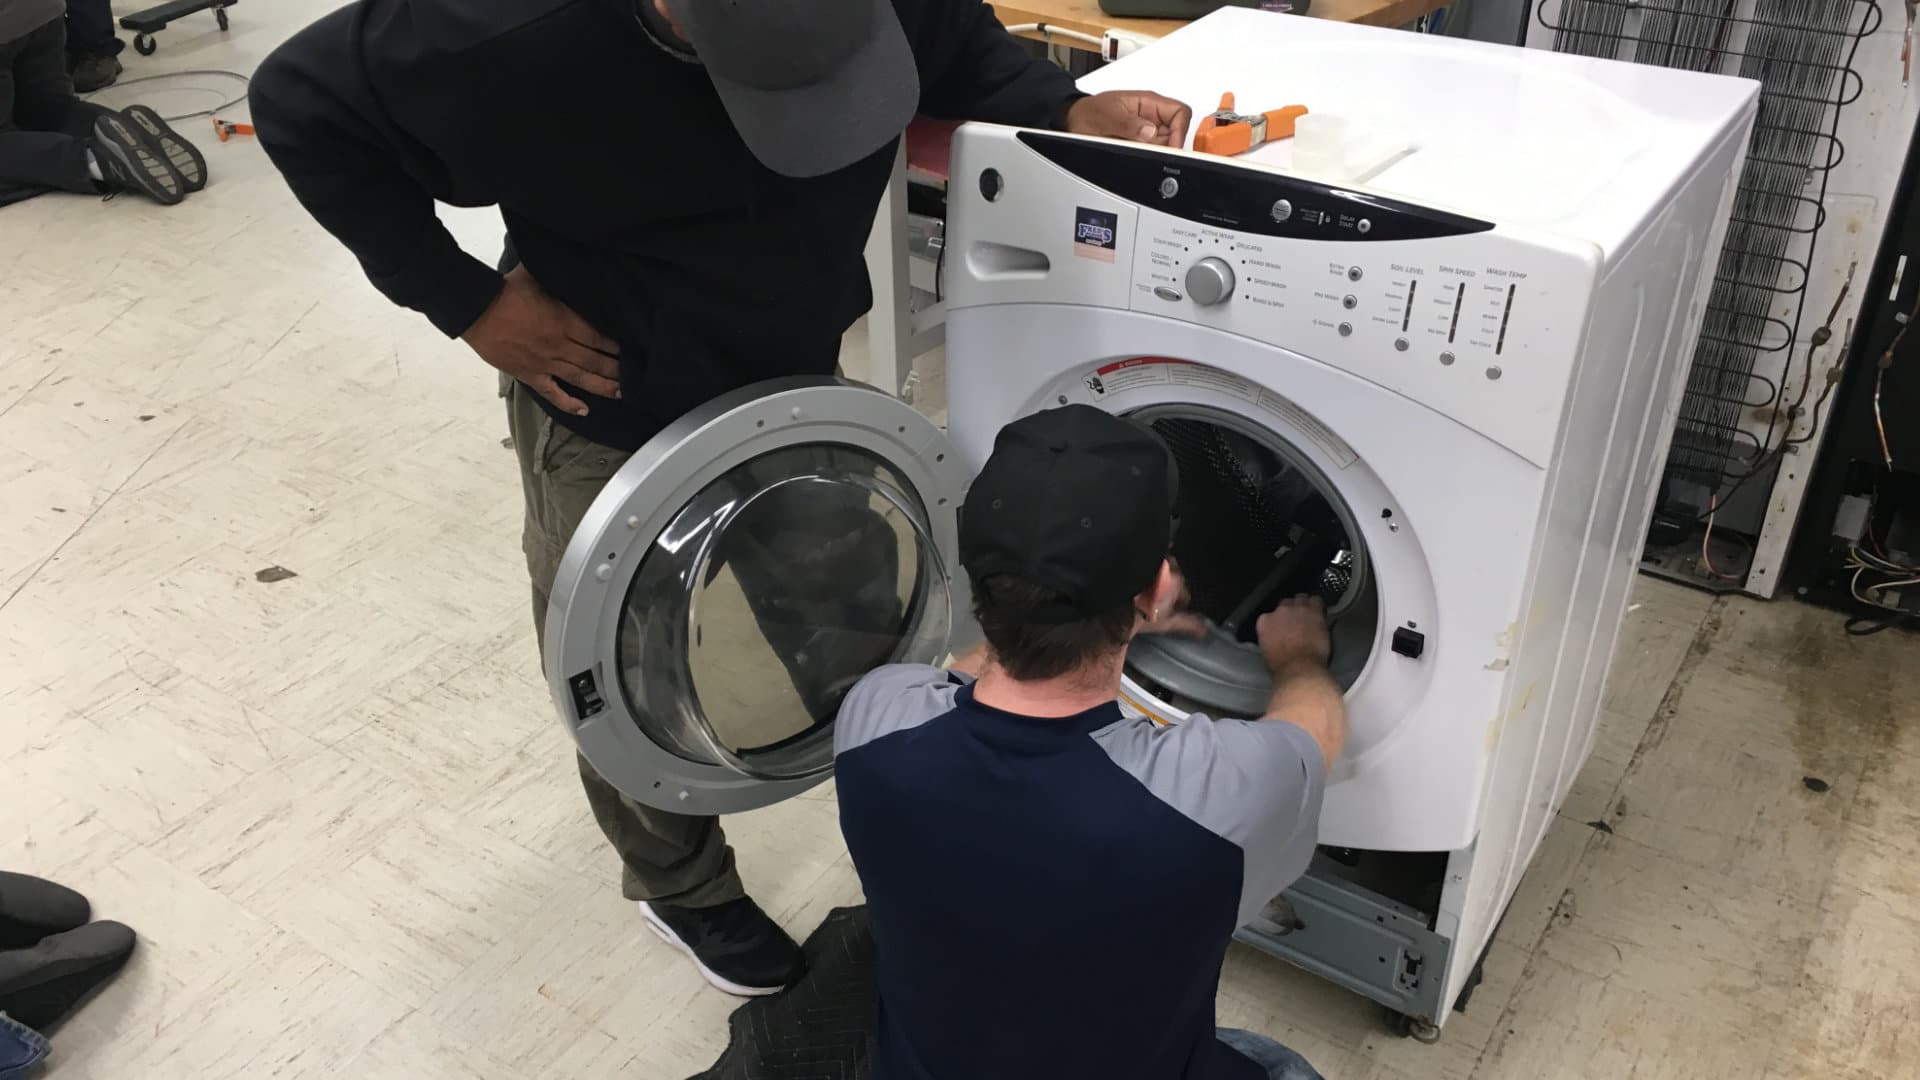 Featured image for “Learning Appliance Repair as a Trade Over Going to College”